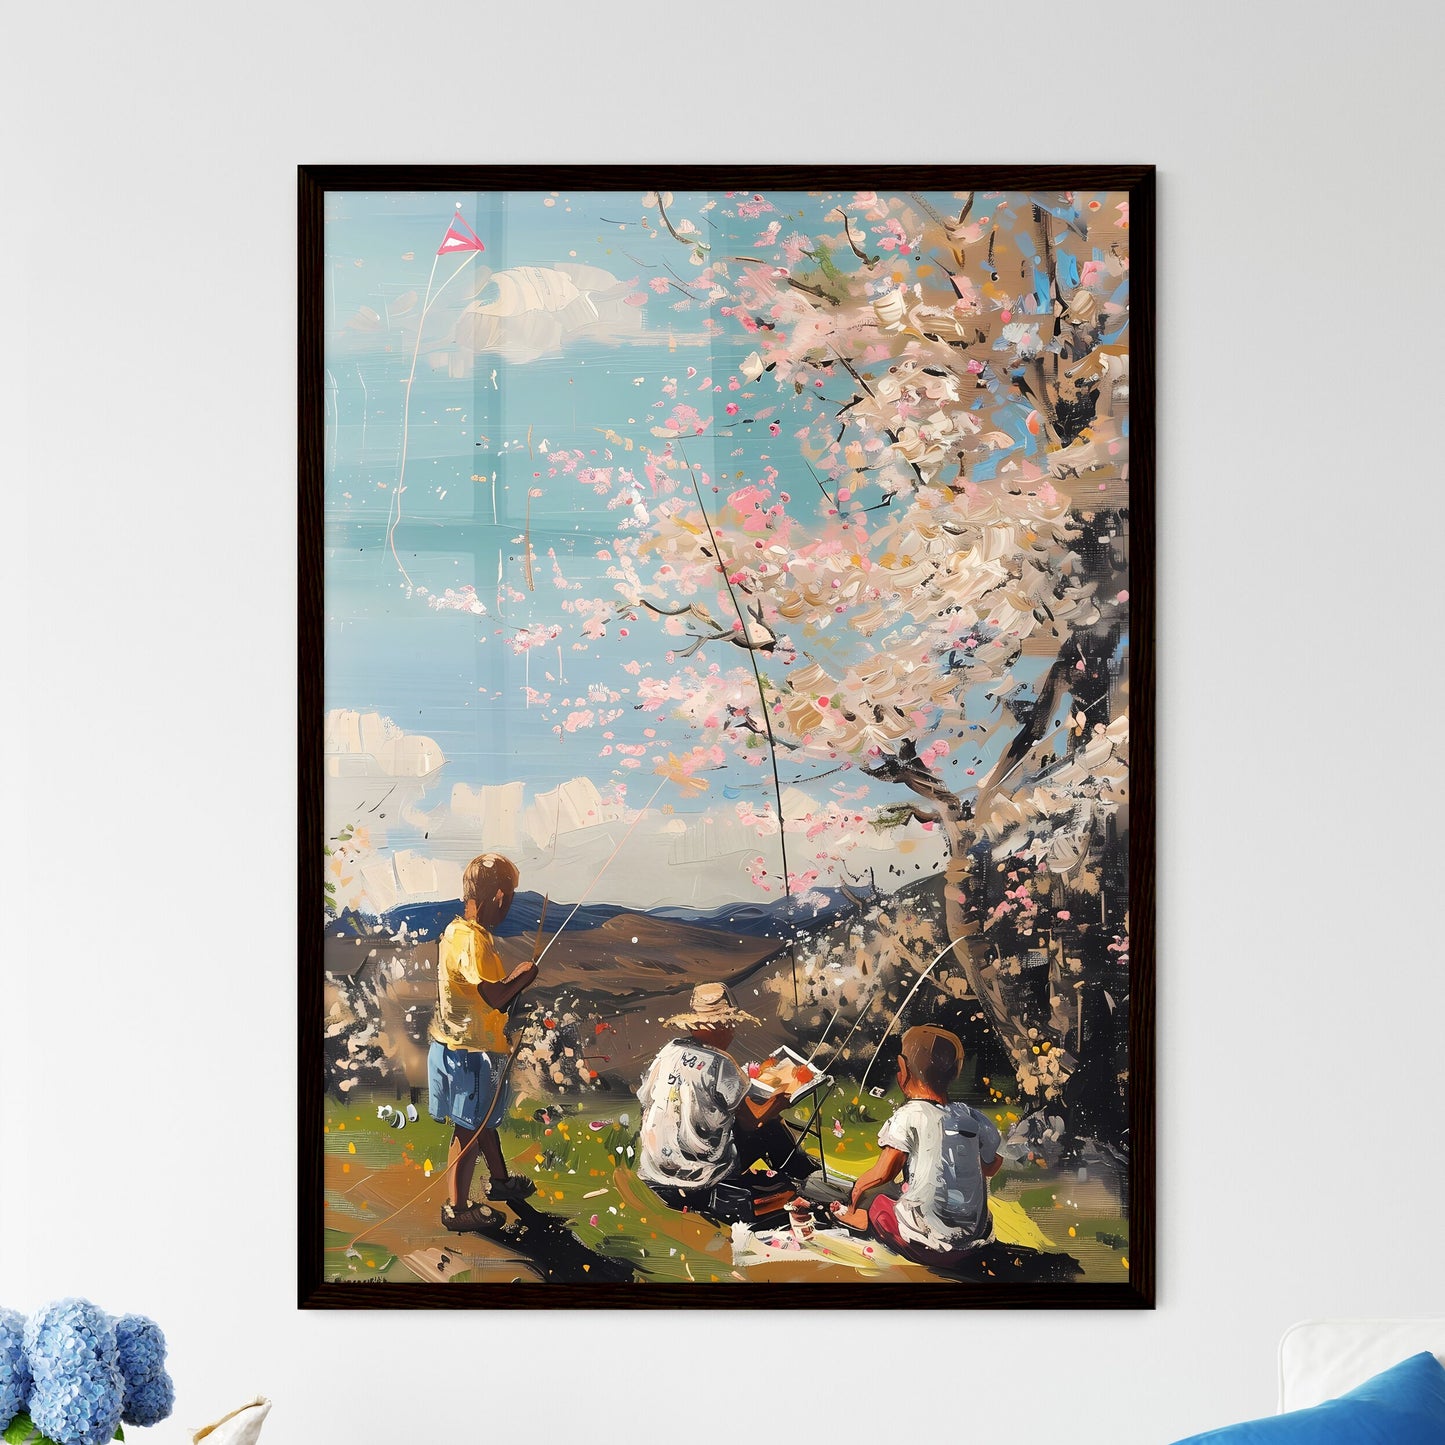 Vibrant Oil Painting: Springtime Picnic under Blossoming Cherry Tree with Kite Flying Children and Group Gathering Default Title